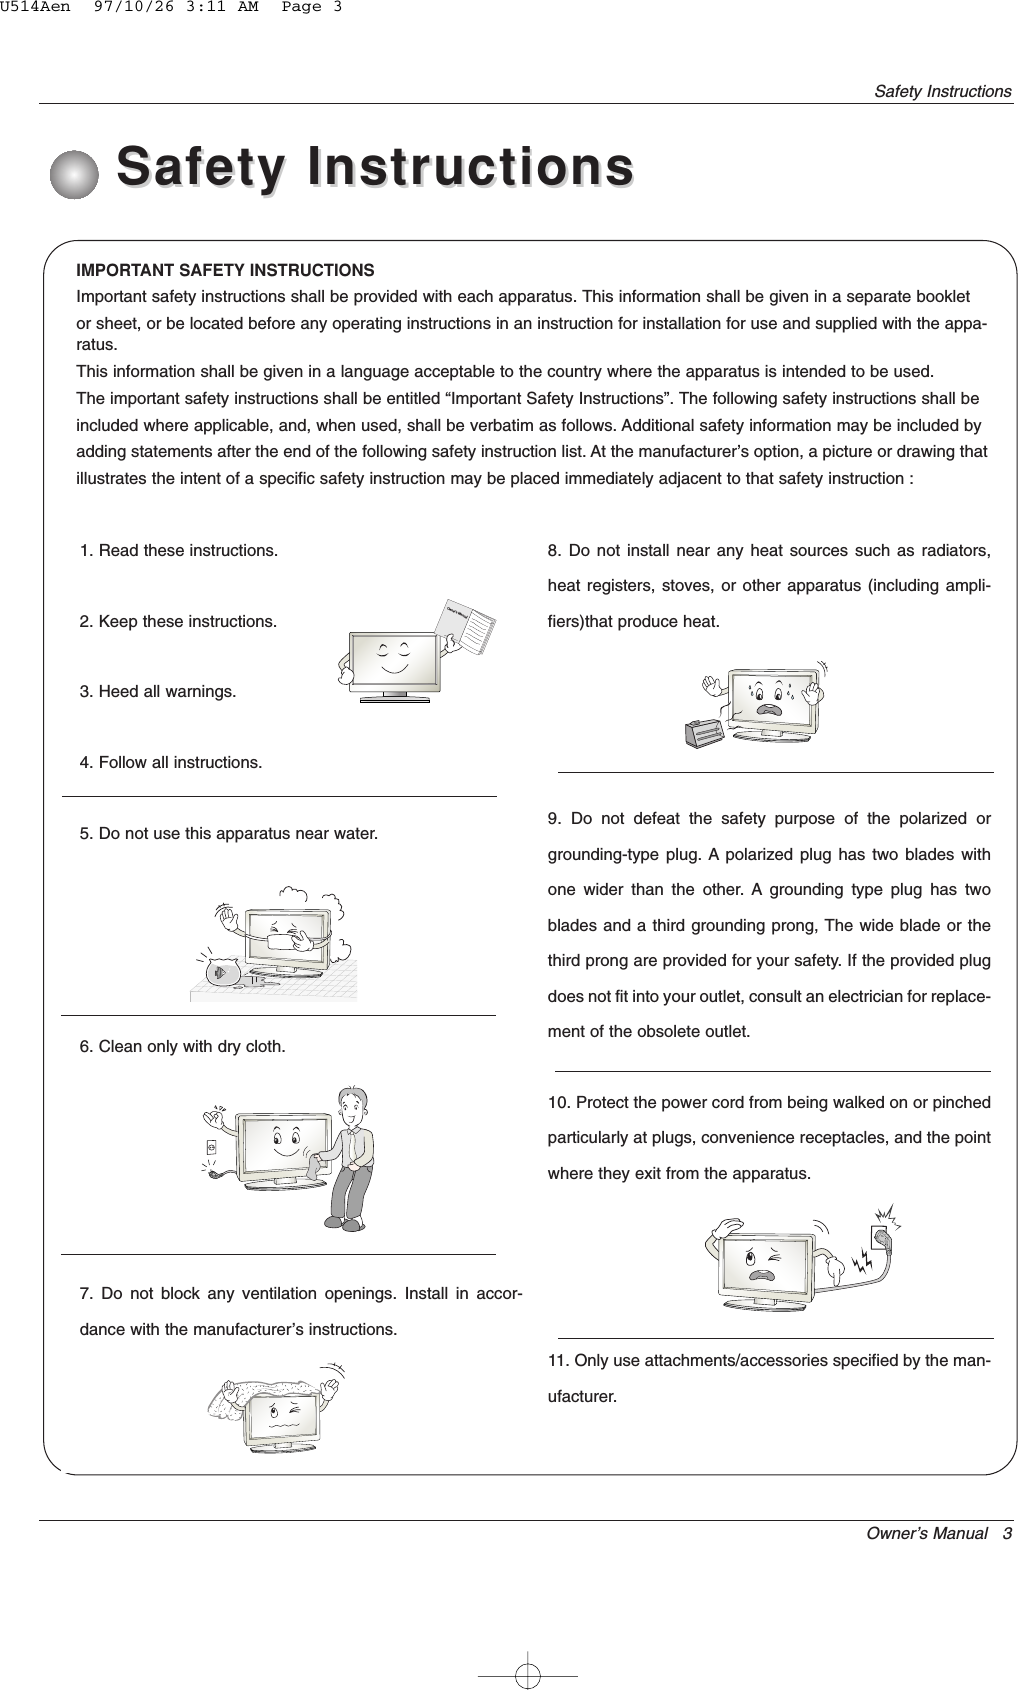 Owner’s Manual   3Safety InstructionsIMPORTANT SAFETY INSTRUCTIONSImportant safety instructions shall be provided with each apparatus. This information shall be given in a separate bookletor sheet, or be located before any operating instructions in an instruction for installation for use and supplied with the appa-ratus.This information shall be given in a language acceptable to the country where the apparatus is intended to be used.The important safety instructions shall be entitled “Important Safety Instructions”. The following safety instructions shall beincluded where applicable, and, when used, shall be verbatim as follows. Additional safety information may be included byadding statements after the end of the following safety instruction list. At the manufacturer’s option, a picture or drawing thatillustrates the intent of a specific safety instruction may be placed immediately adjacent to that safety instruction :1. Read these instructions.2. Keep these instructions.3. Heed all warnings.4. Follow all instructions.5. Do not use this apparatus near water.6. Clean only with dry cloth.7. Do not block any ventilation openings. Install in accor-dance with the manufacturer’s instructions.8. Do not install near any heat sources such as radiators,heat registers, stoves, or other apparatus (including ampli-fiers)that produce heat.9. Do not defeat the safety purpose of the polarized orgrounding-type plug. A polarized plug has two blades withone wider than the other. A grounding type plug has twoblades and a third grounding prong, The wide blade or thethird prong are provided for your safety. If the provided plugdoes not fit into your outlet, consult an electrician for replace-ment of the obsolete outlet.10. Protect the power cord from being walked on or pinchedparticularly at plugs, convenience receptacles, and the pointwhere they exit from the apparatus.11. Only use attachments/accessories specified by the man-ufacturer.Safety InstructionsSafety InstructionsOwner&apos;s ManualU514Aen  97/10/26 3:11 AM  Page 3